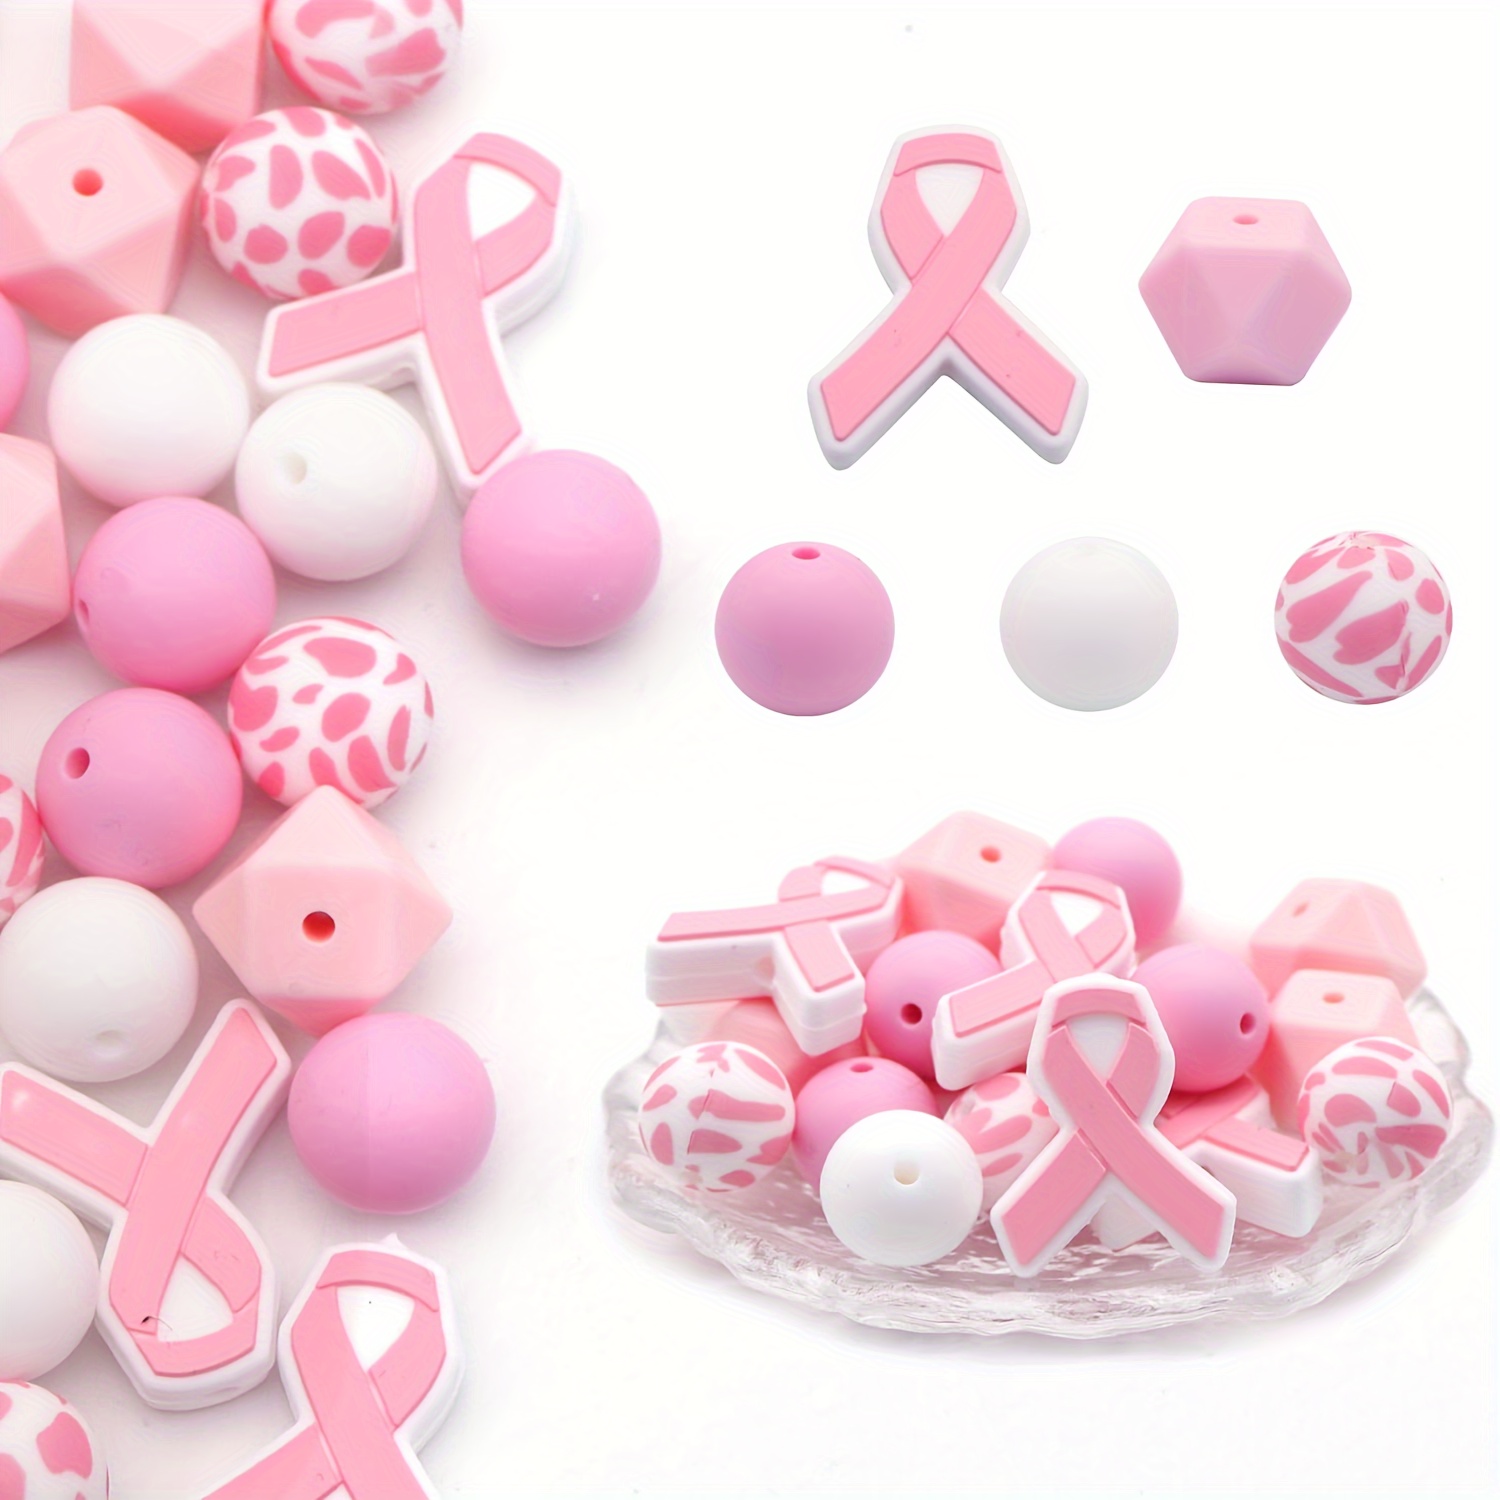 

25pcs Pink Ribbon Shape Silicone Bead Set, Assorted Shapes For Diy Necklace, Keychains, Bag Chain, Phone Straps, Bracelets, Jewelry Making Supplies, Breast Cancer Awareness Craft Kit